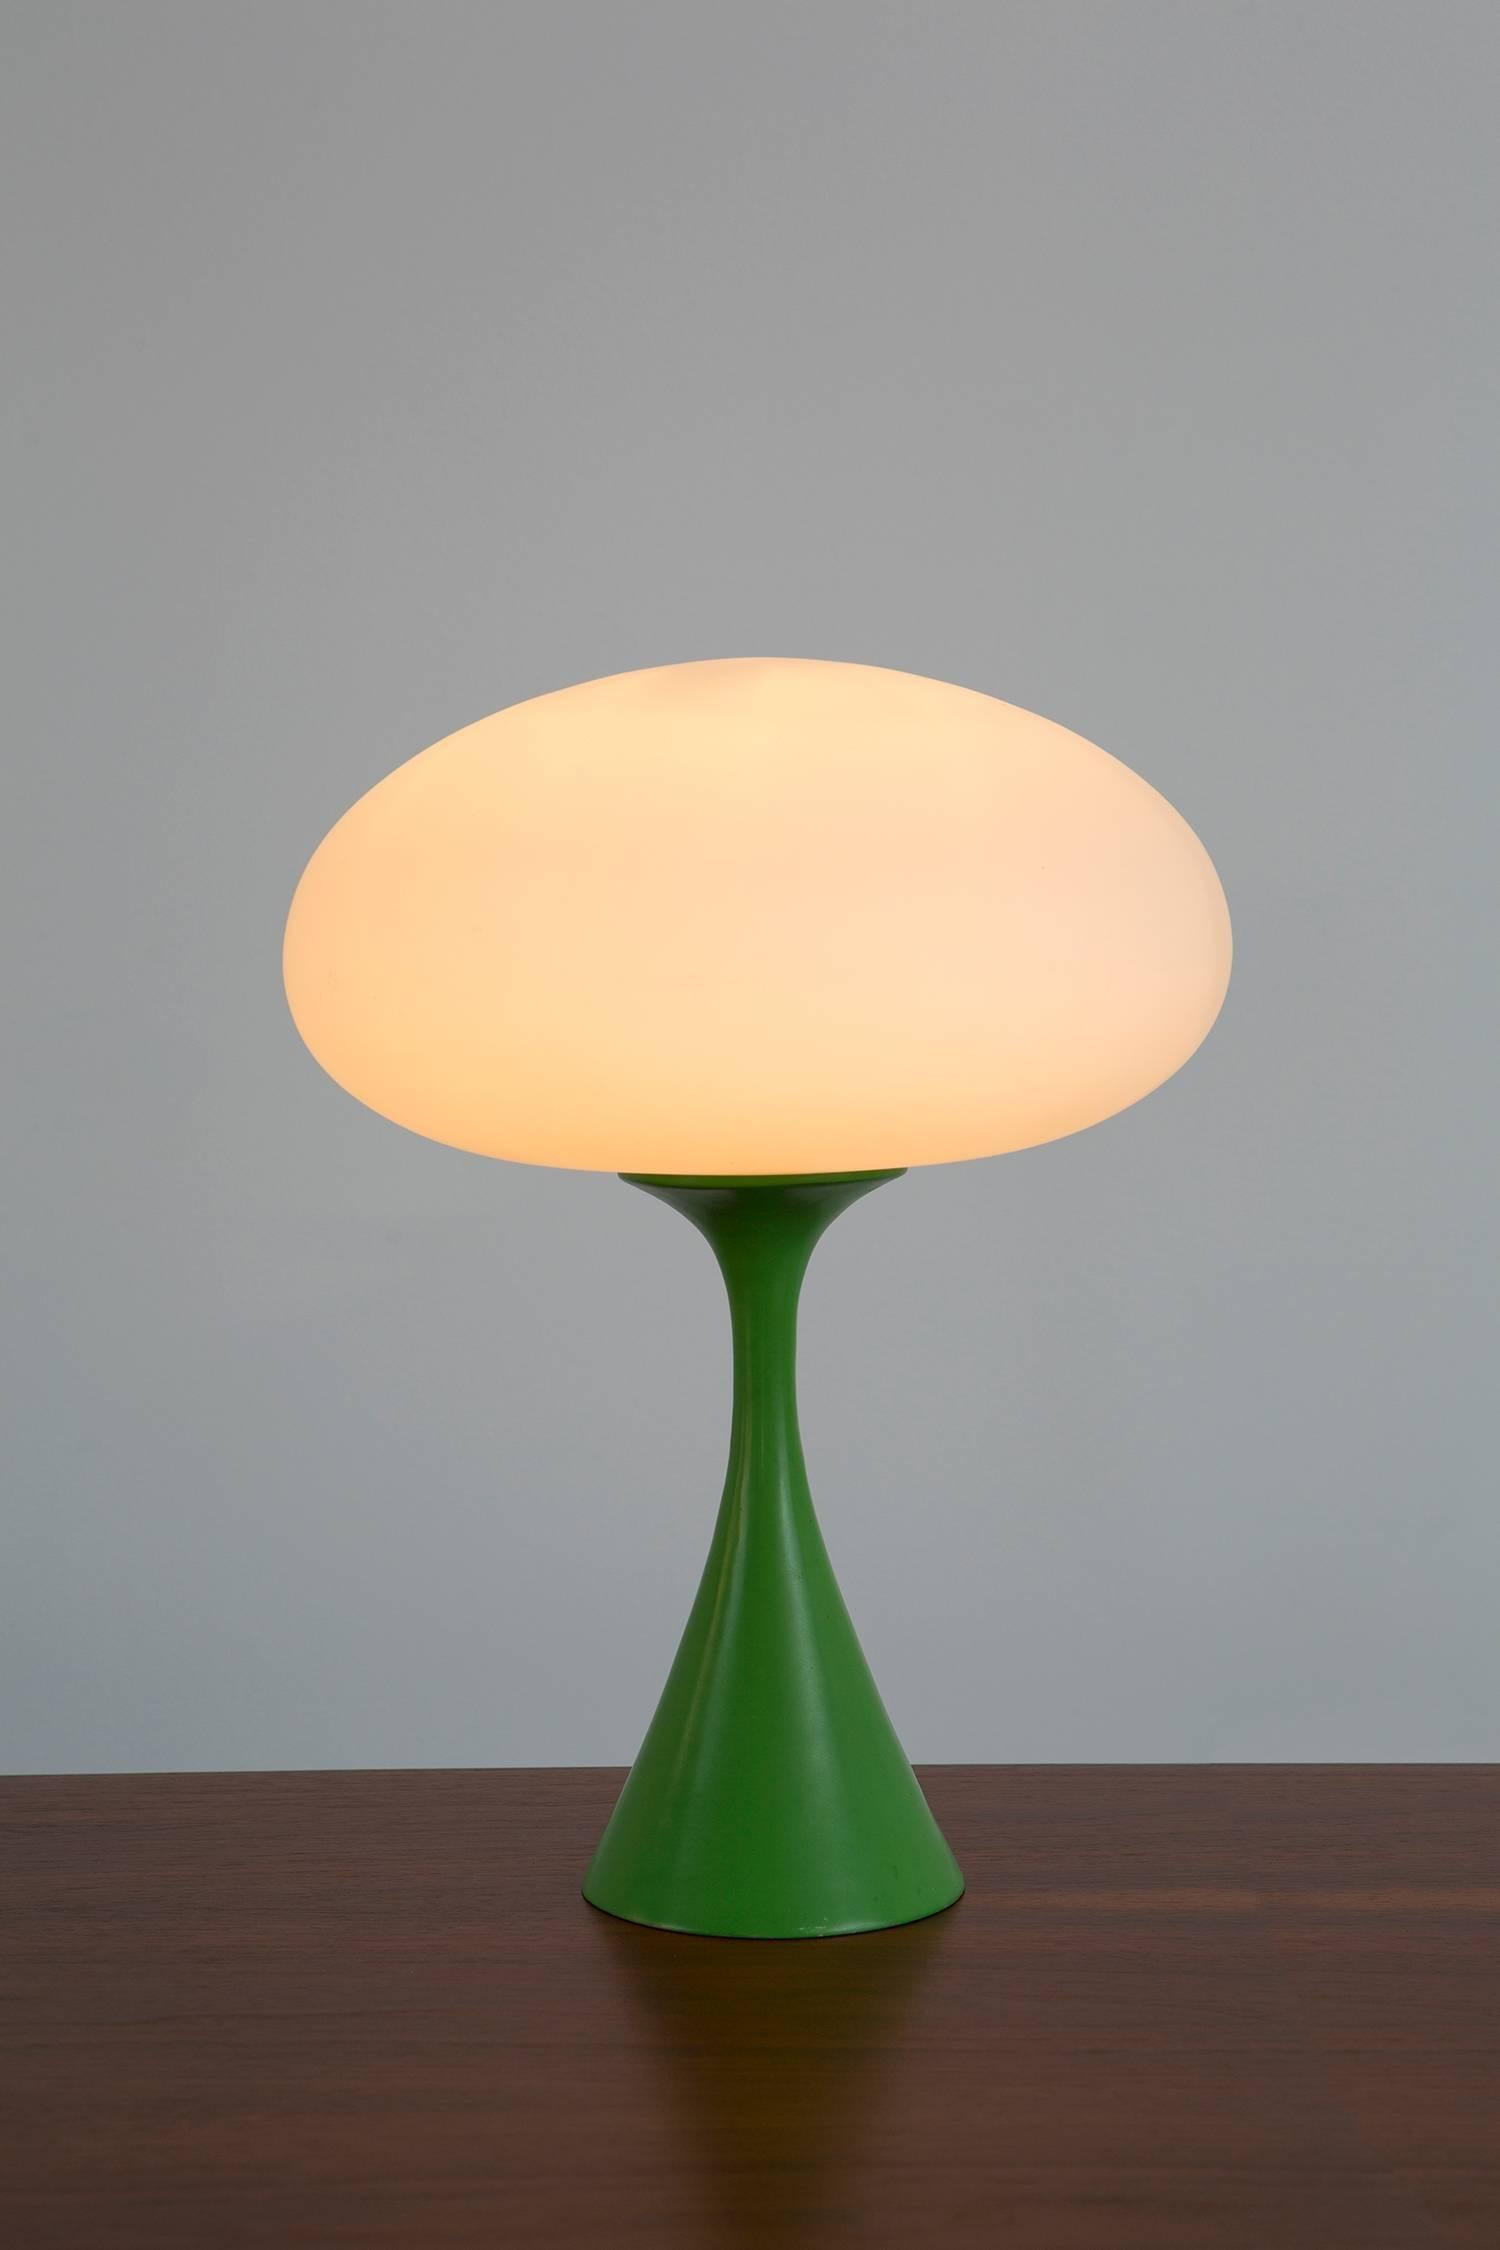 Mushroom lamp designed by Bill Curry for Laurel Lamp Co. Original frosted glass globe with a green enamel metal base.

 